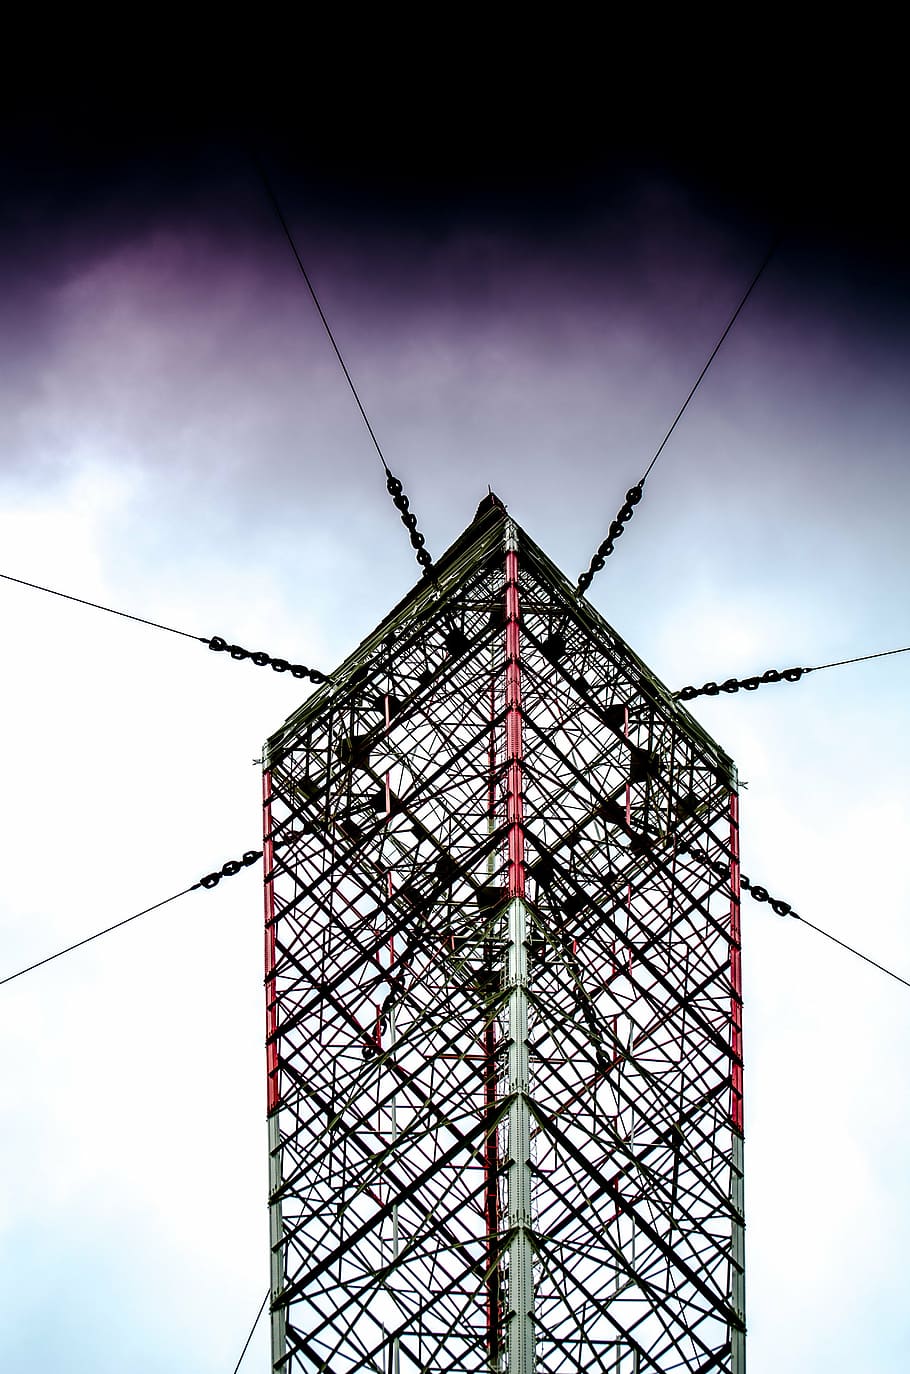 today, rádiótorony, radio antenna, sky, low angle view, cable, cloud - sky, built structure, architecture, nature